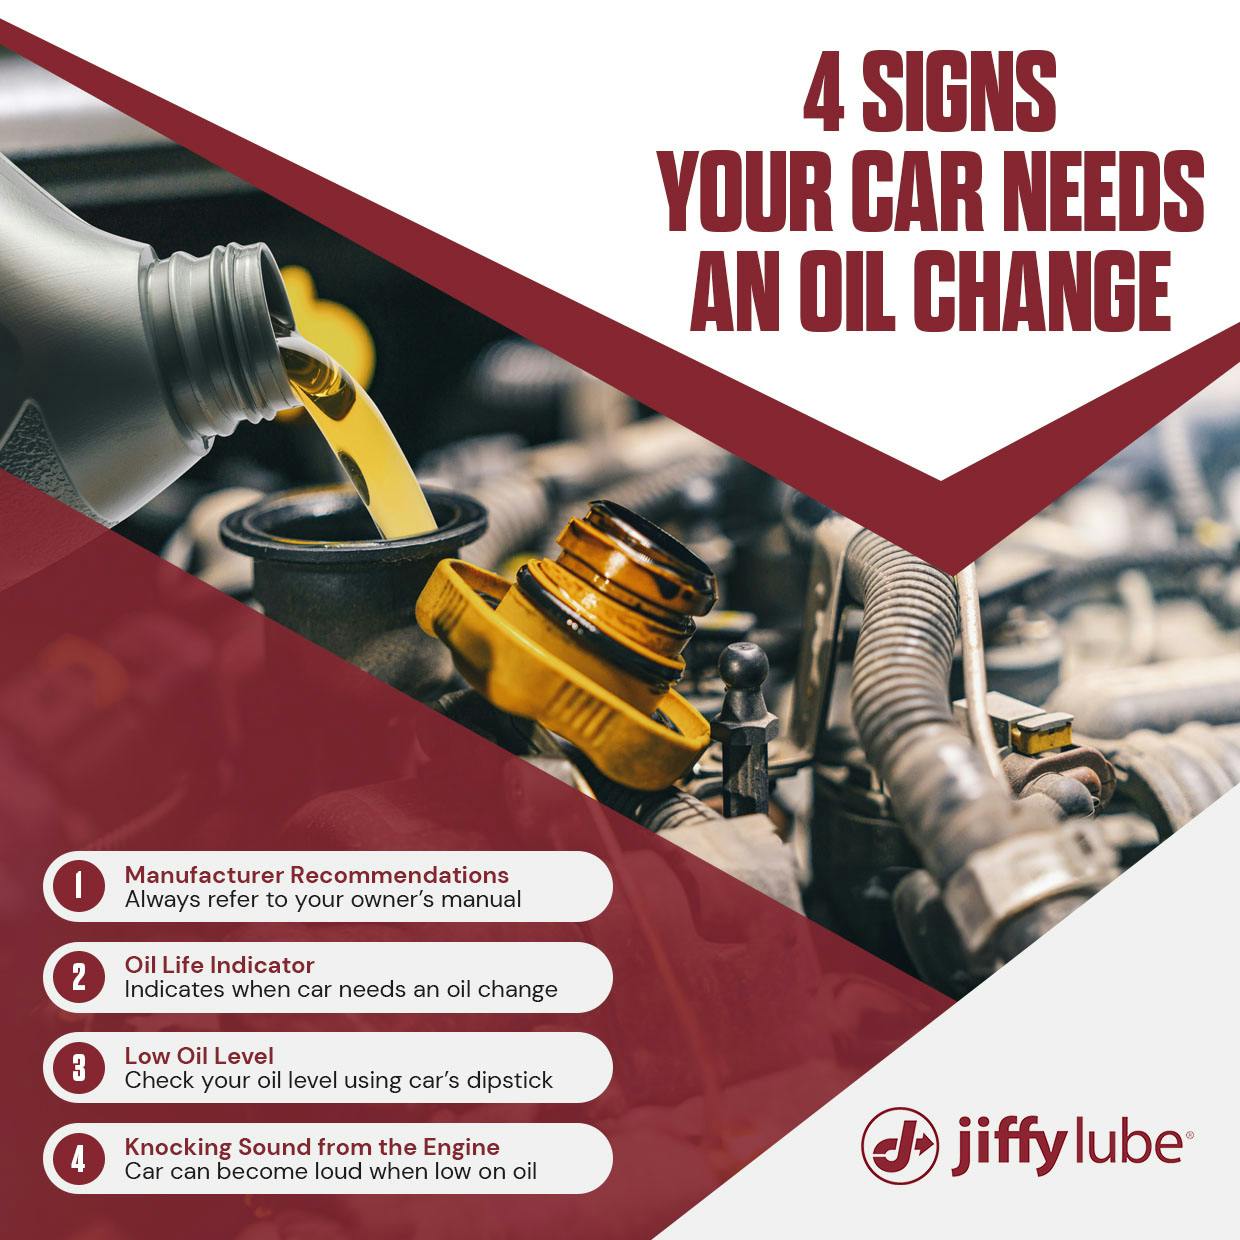 4 signs your car needs an oil change